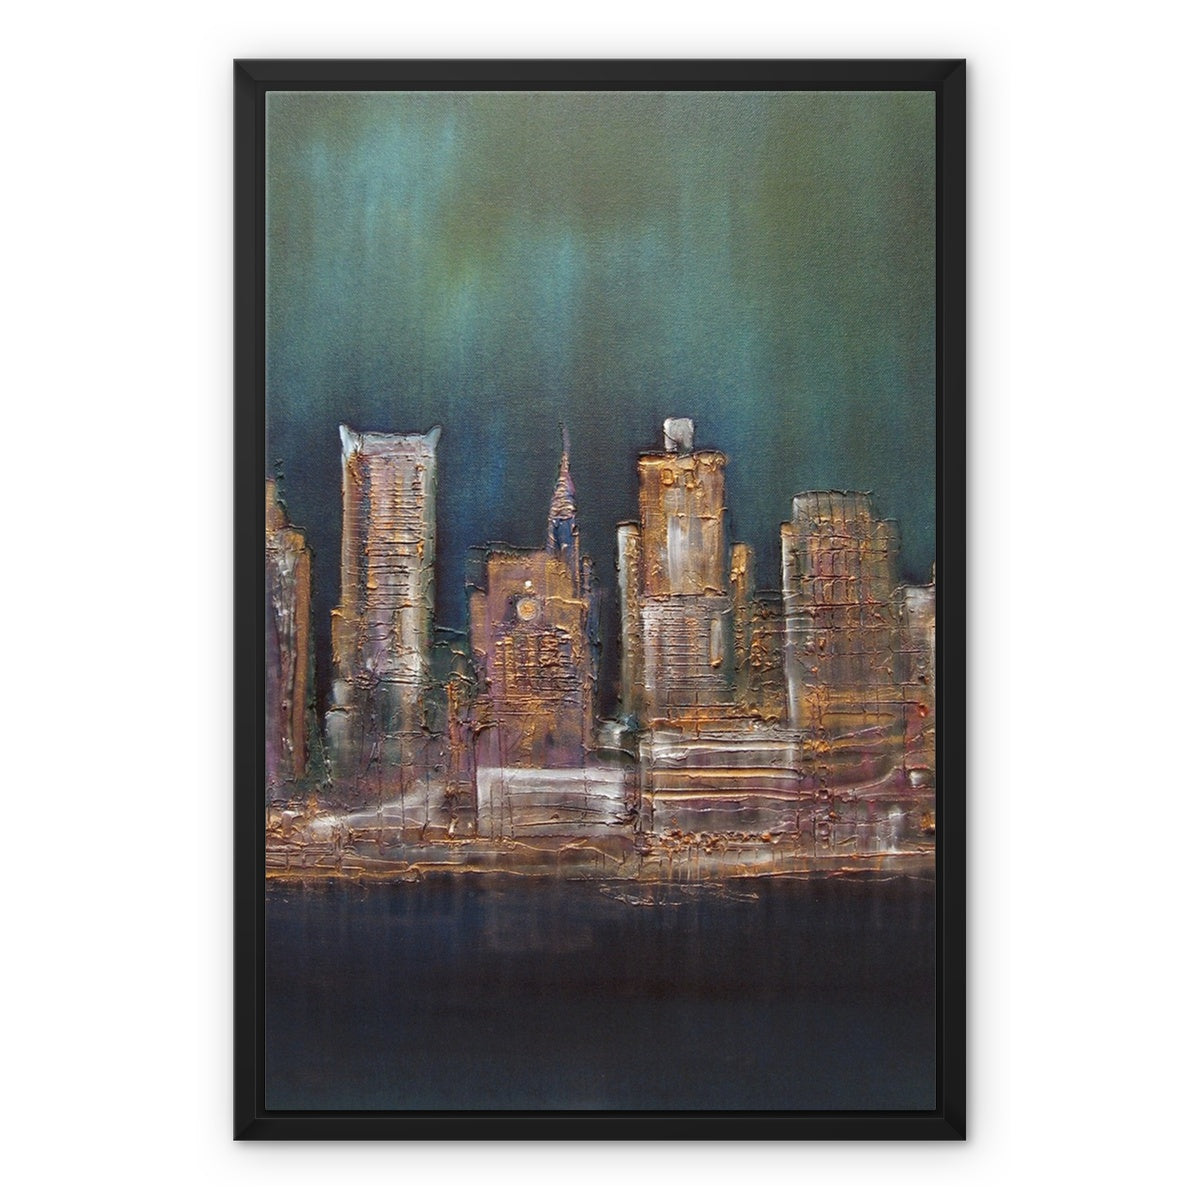 New York West Side Painting | Framed Canvas From Scotland-Floating Framed Canvas Prints-World Art Gallery-18"x24"-Black Frame-Paintings, Prints, Homeware, Art Gifts From Scotland By Scottish Artist Kevin Hunter